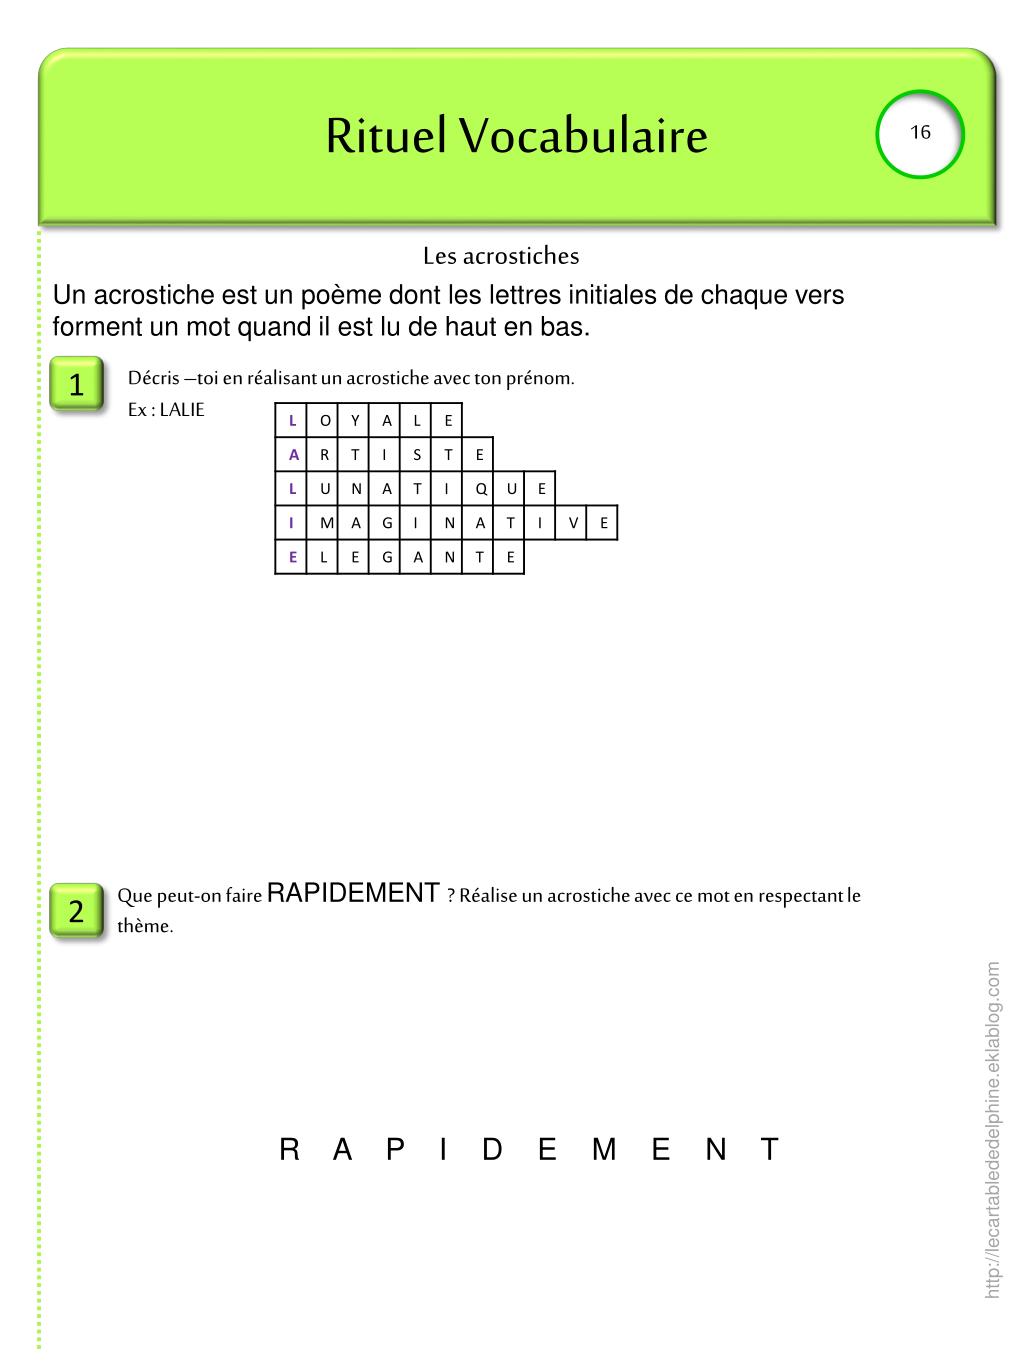 Ppt Rituel Vocabulaire Powerpoint Presentation Free Download Id